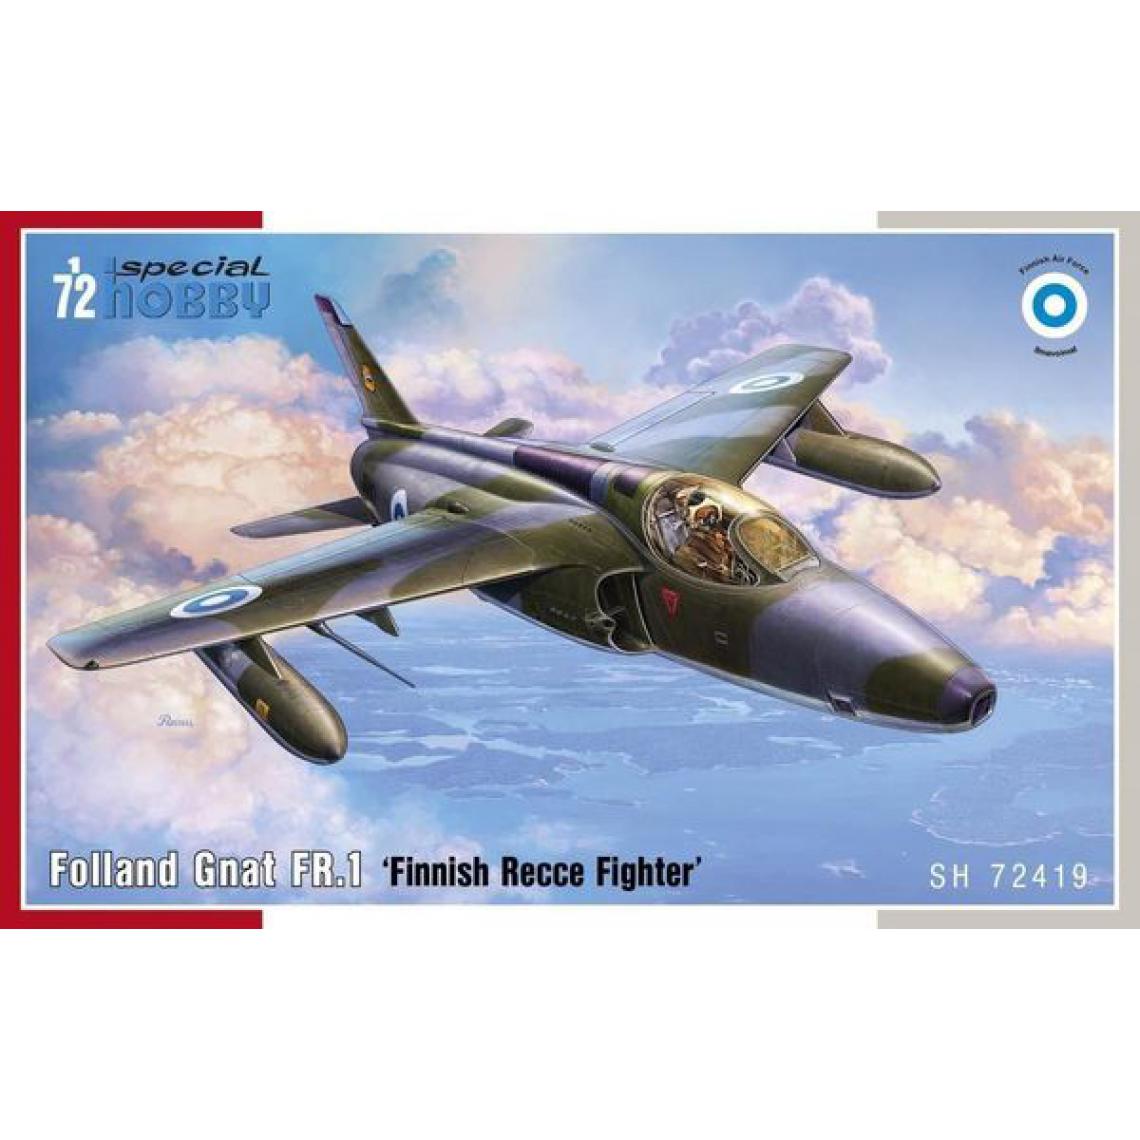 Special Hobby - Folland Gnat FR.1 Finnish Recce Fighter - 1:72e - Special Hobby - Accessoires et pièces